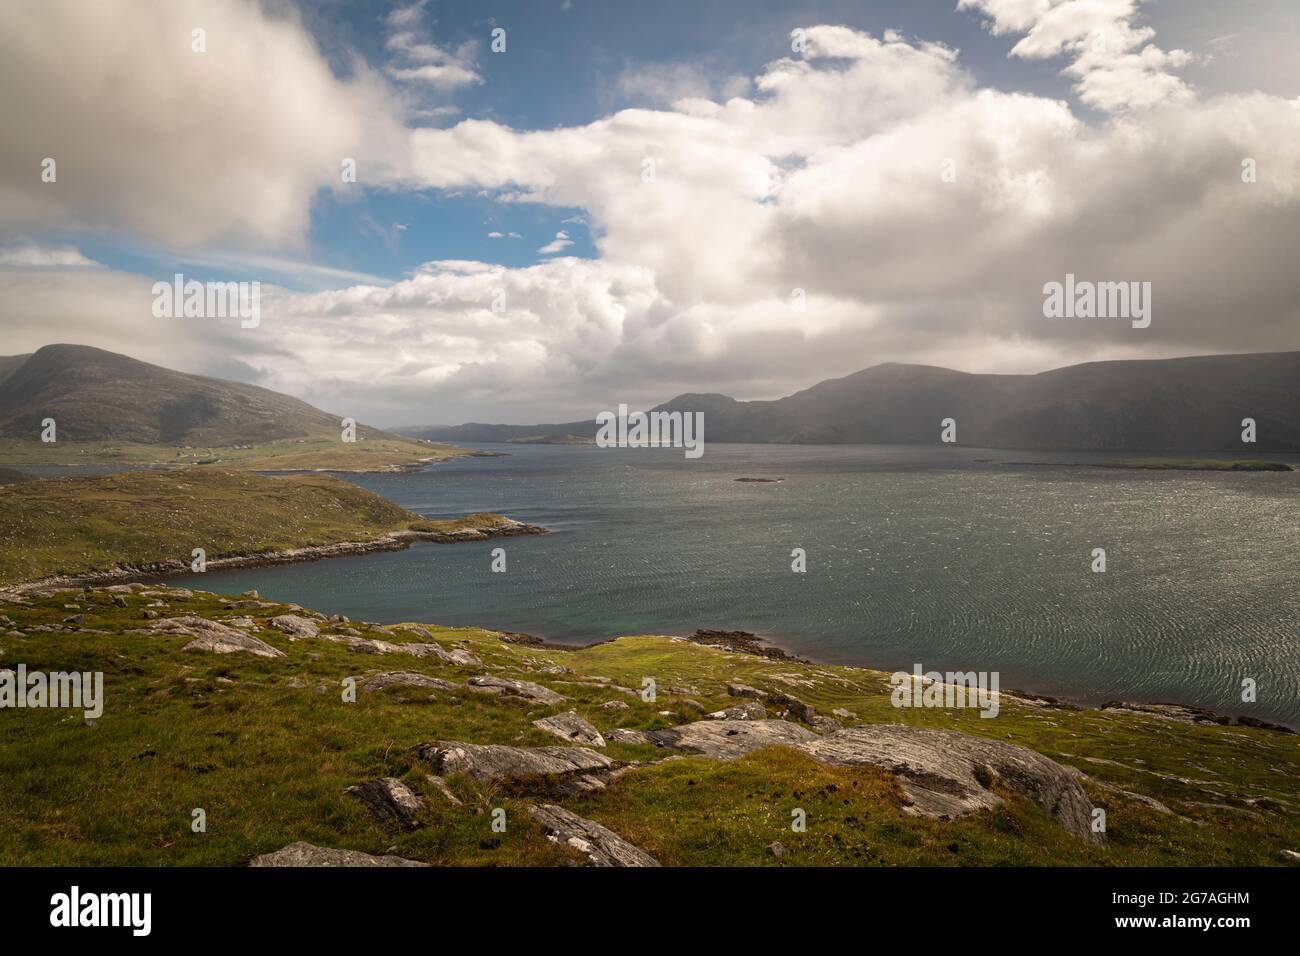 A summer 3 shot HDR image of West Loch Tarbert, Loch a Siar, from Aird am Tolmachain, Isle of Harris, Western Isles, Scotland. 24 June 2021 Stock Photo